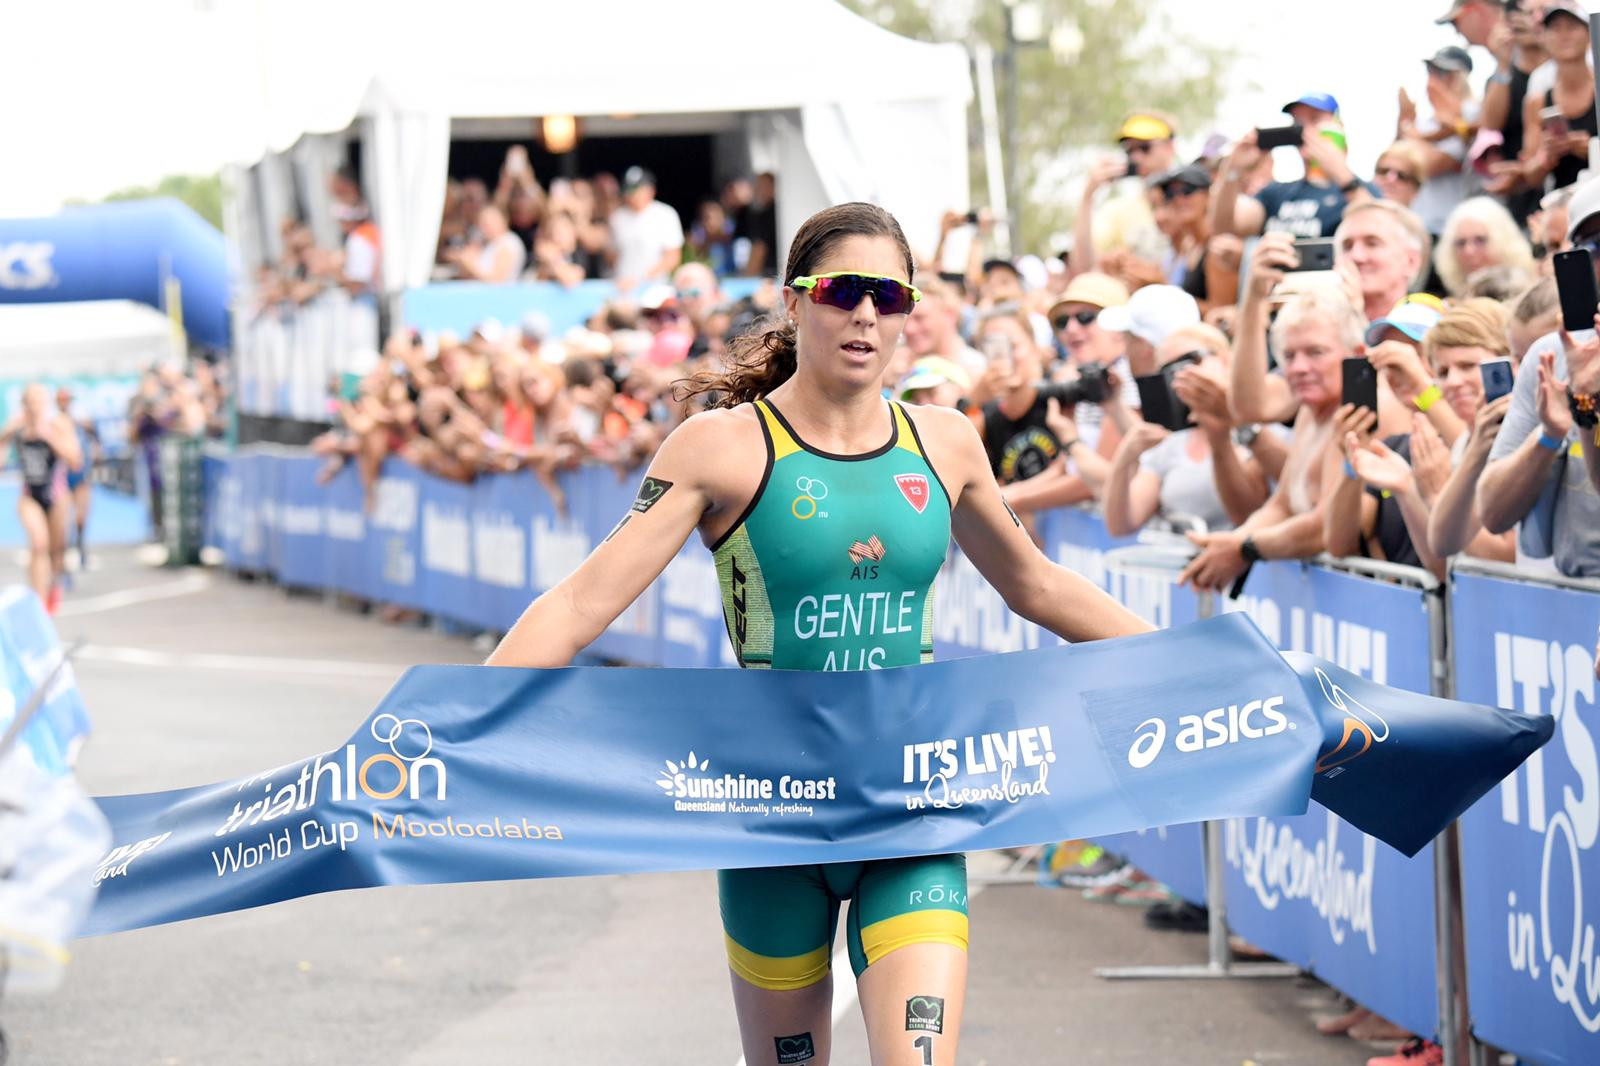 Gentle golden again on home soil as she takes ITU World Cup title in Queensland's Mooloolaba